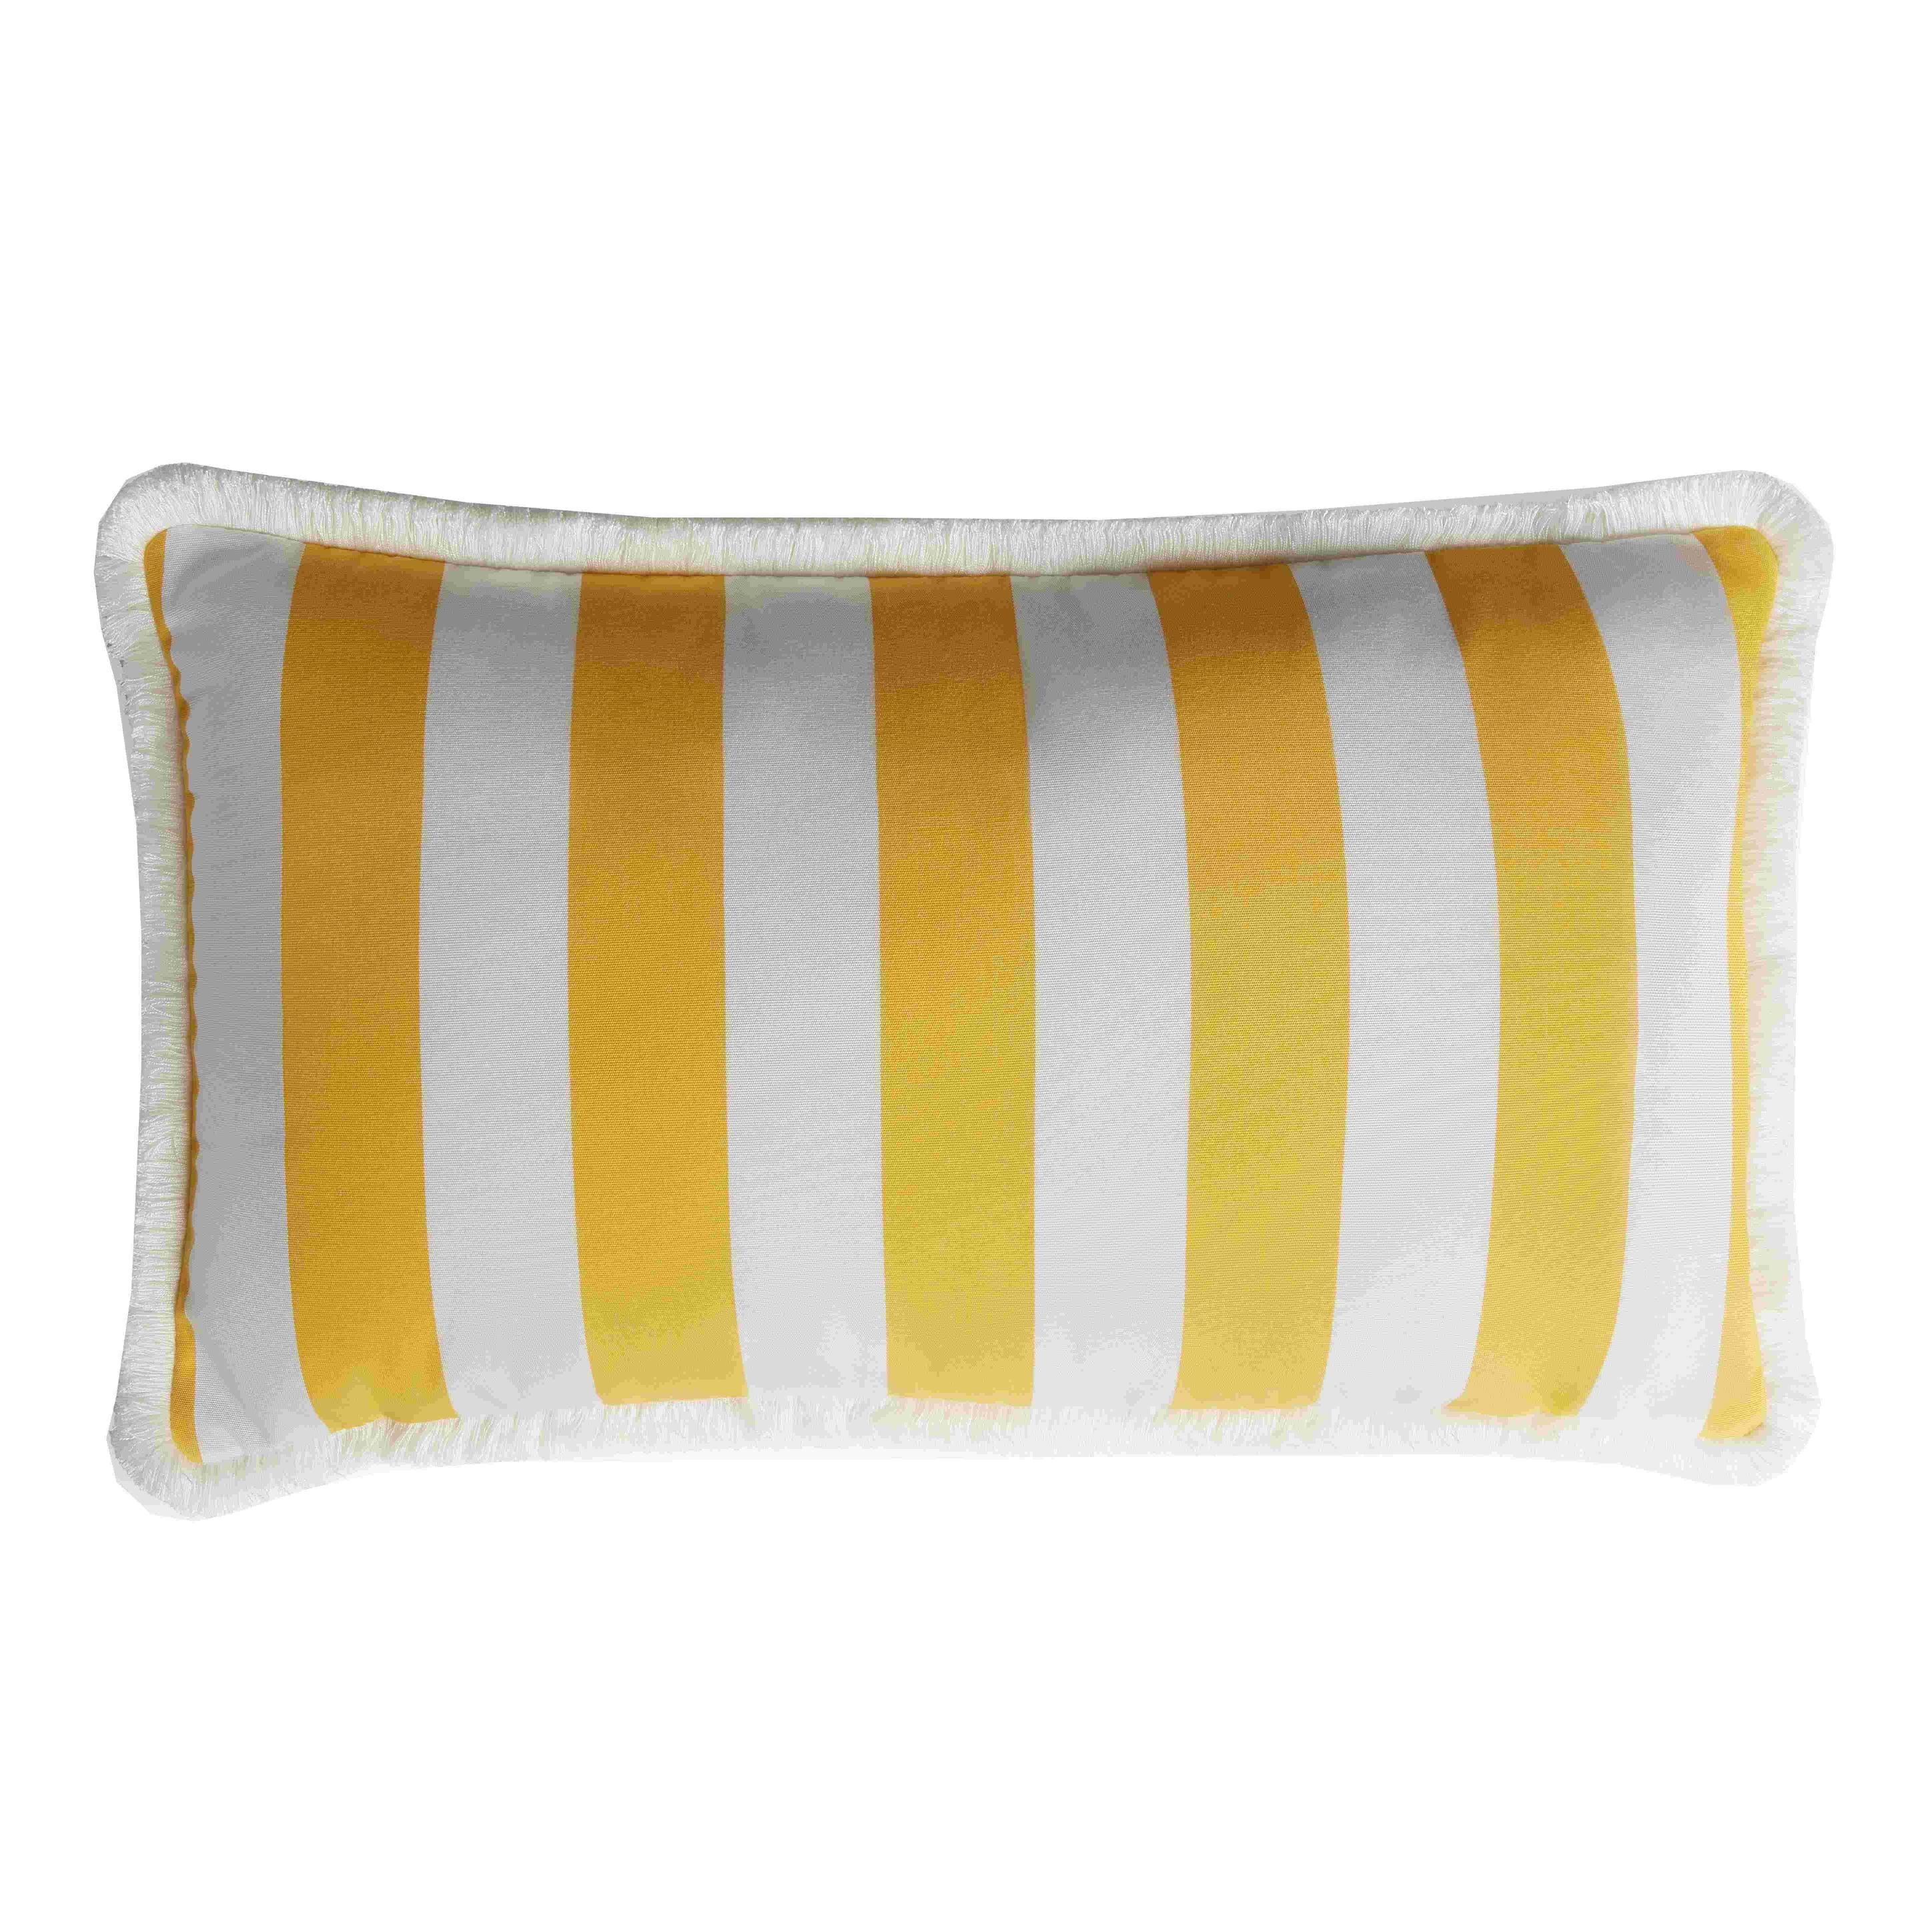 Lo Decor Yellow Striped Happy Pillow with Fringes